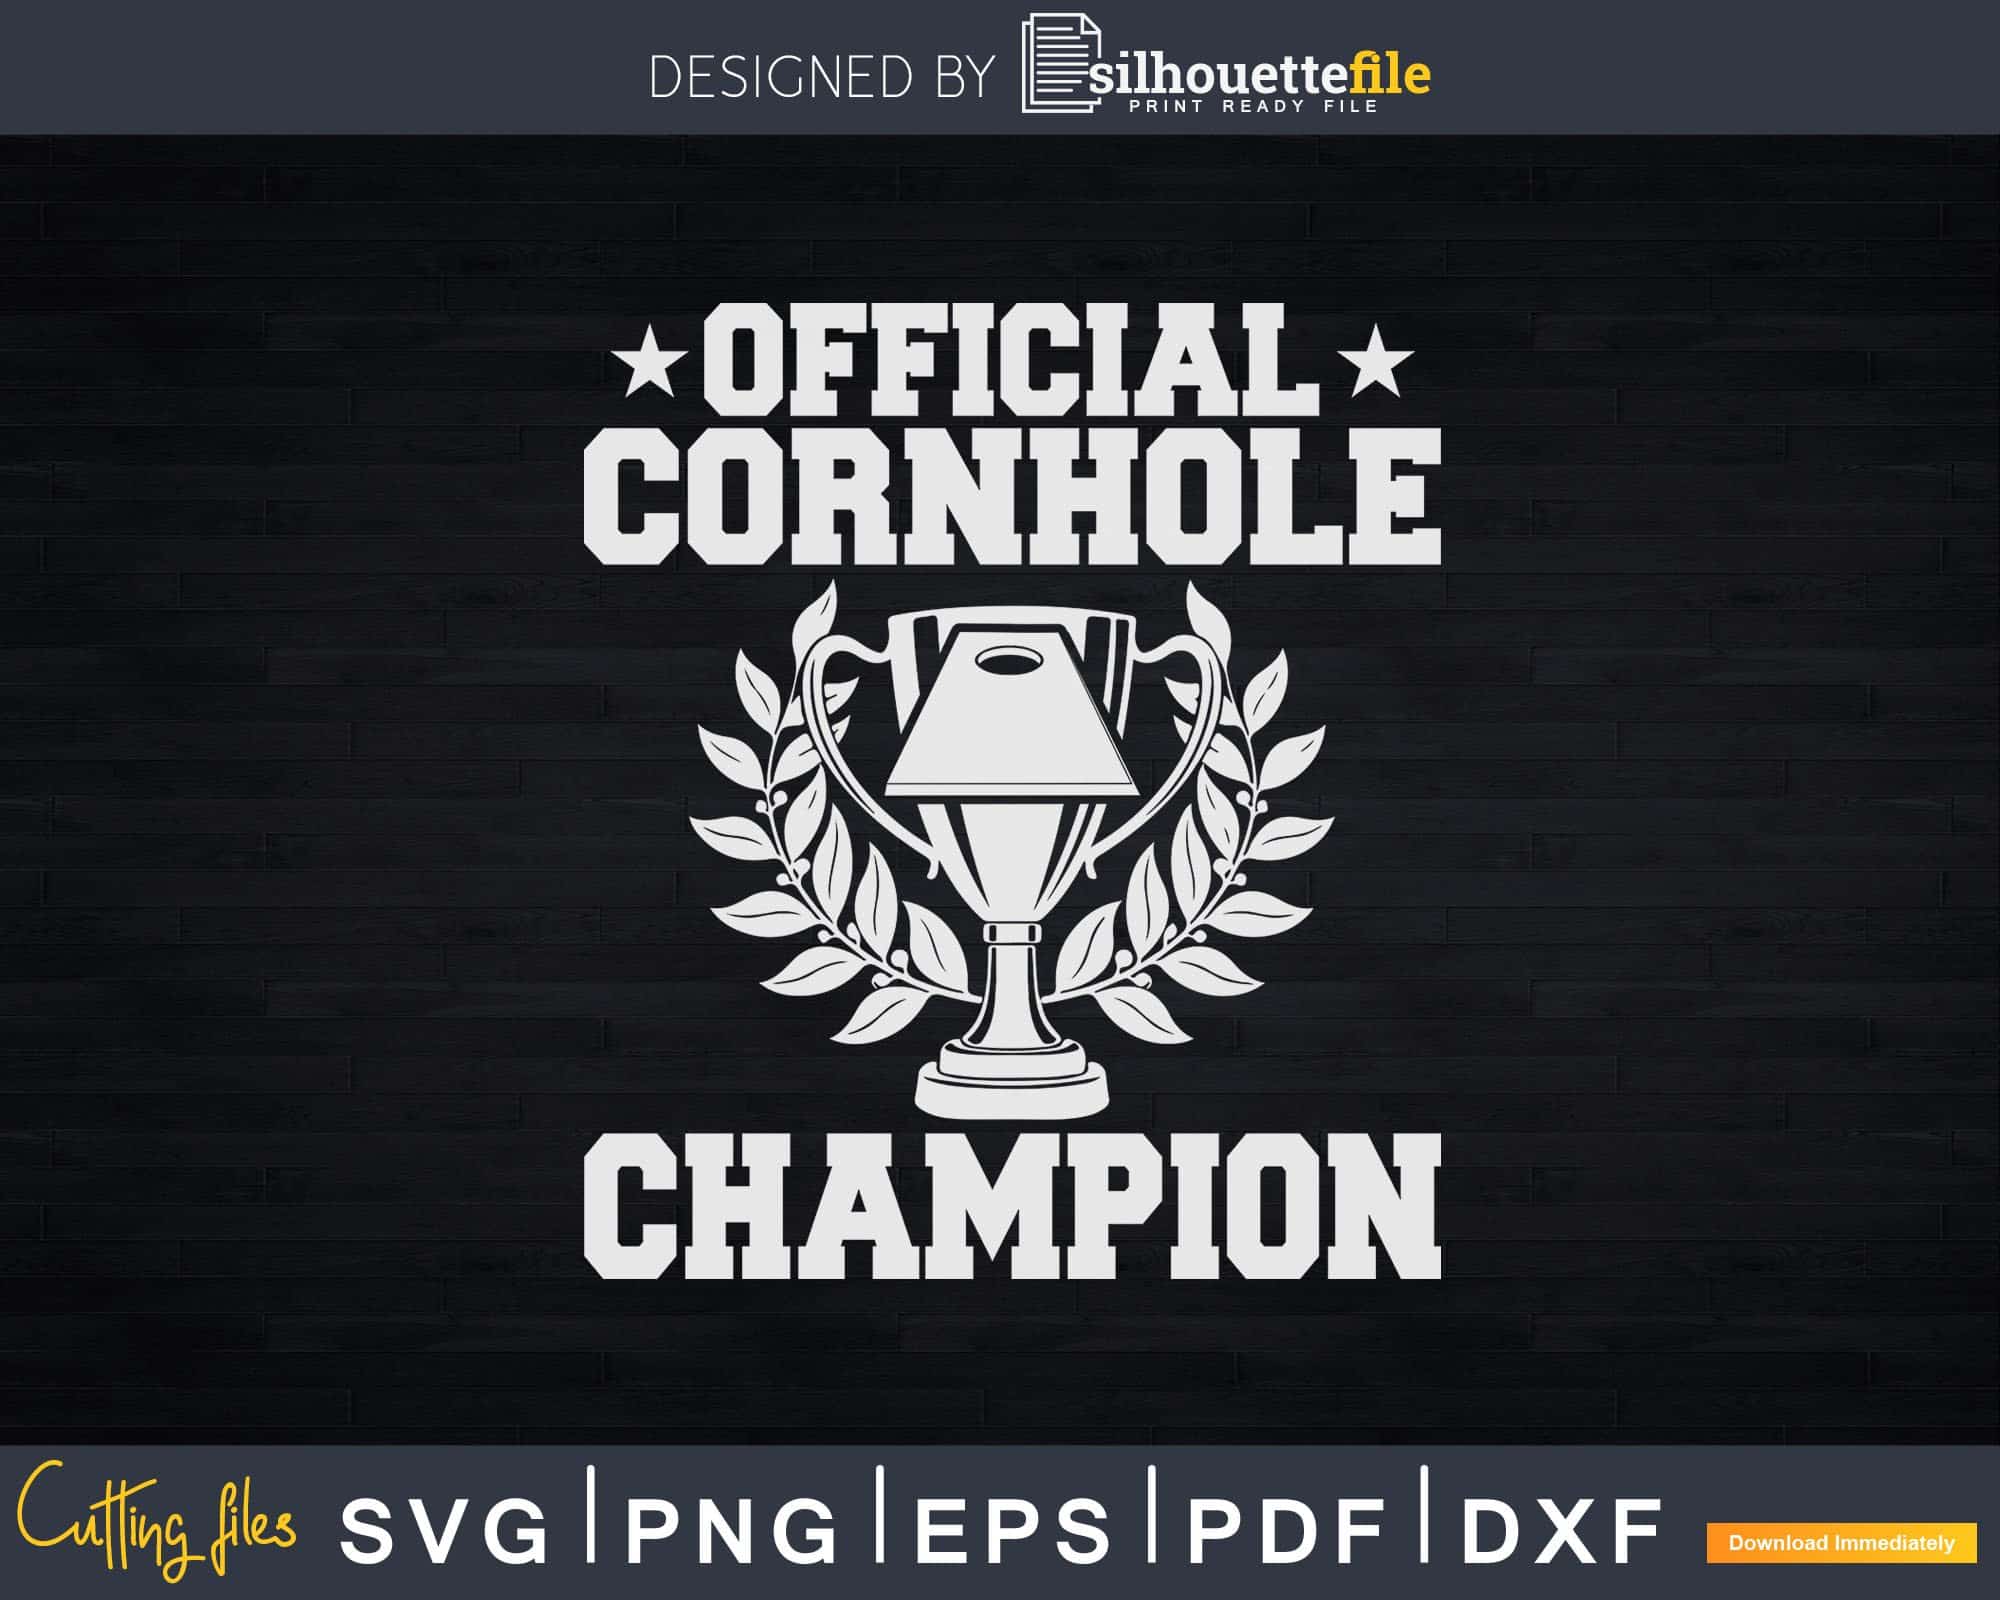 Official Champion Svg Dxf Files | Silhouettefile